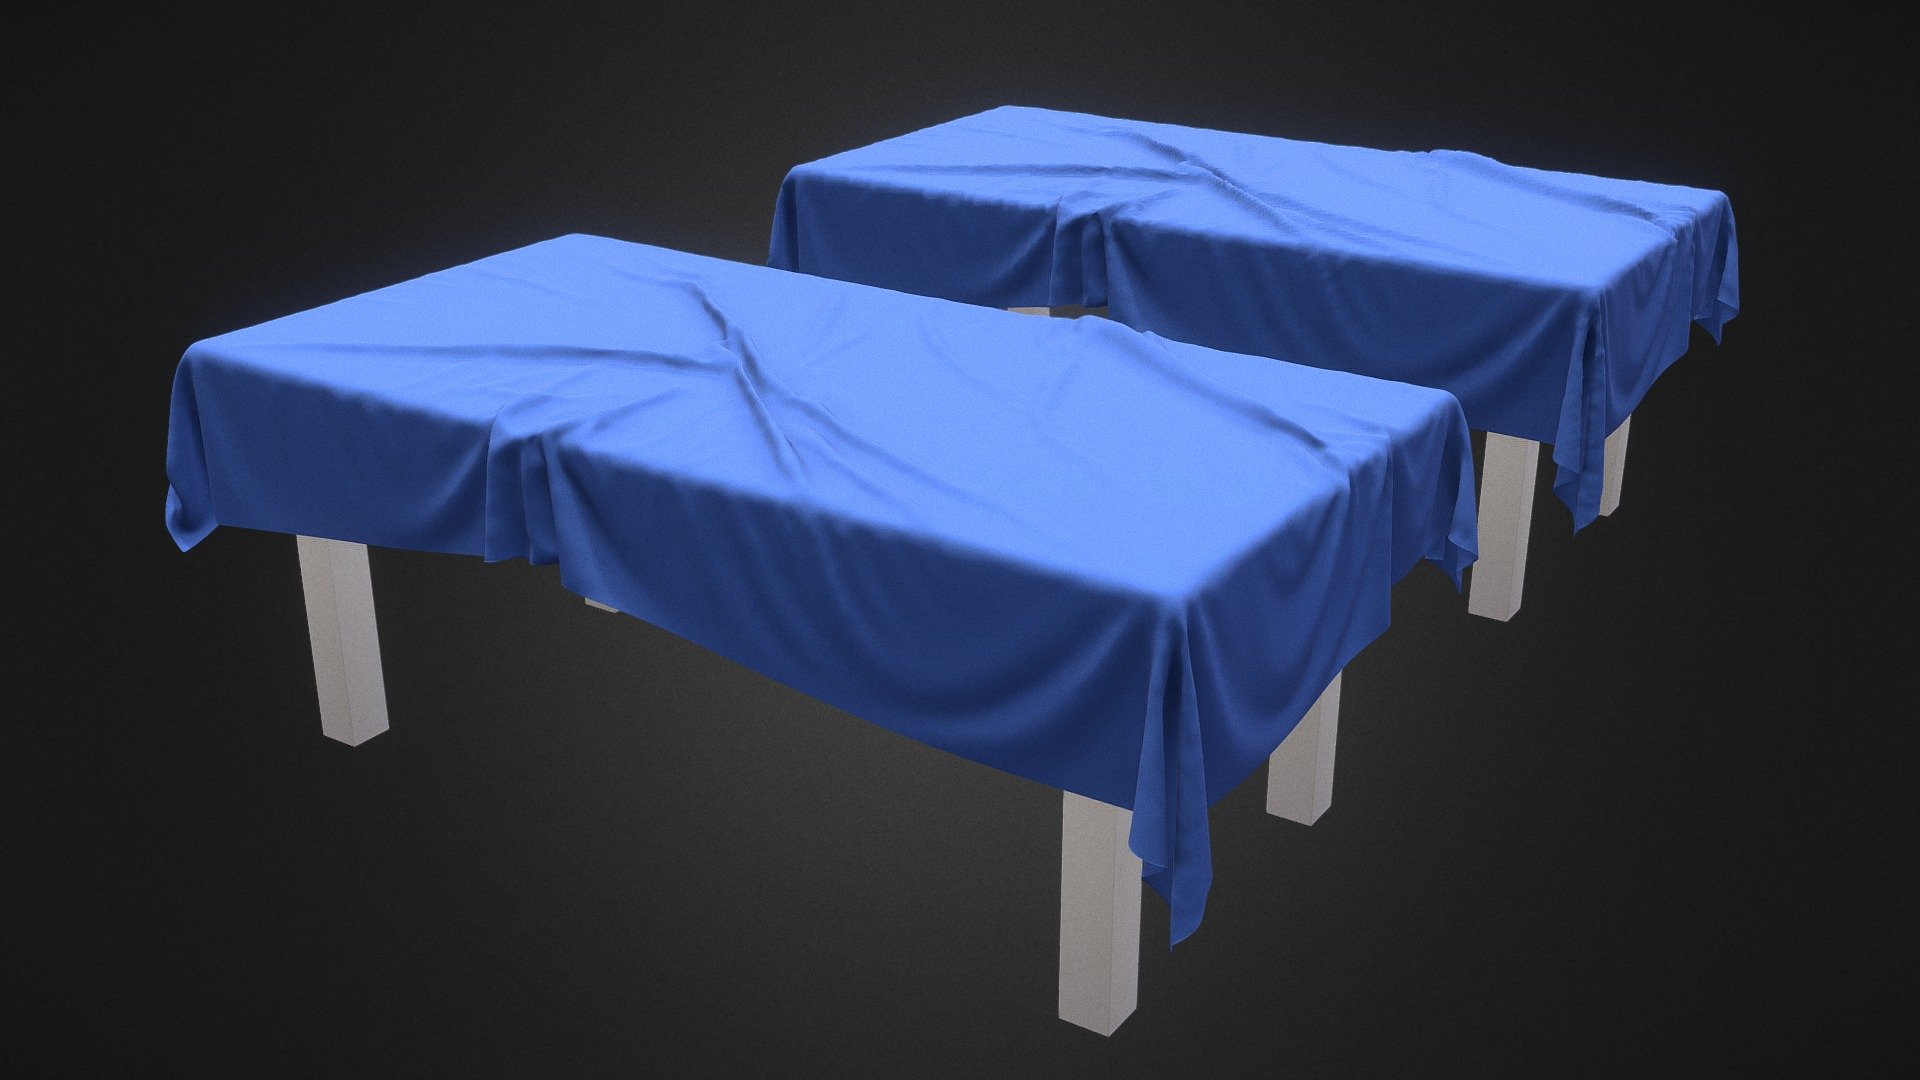 Dining table with realistic wrinkled cloth, no materials.
Subdivided and low poly versions 3d model